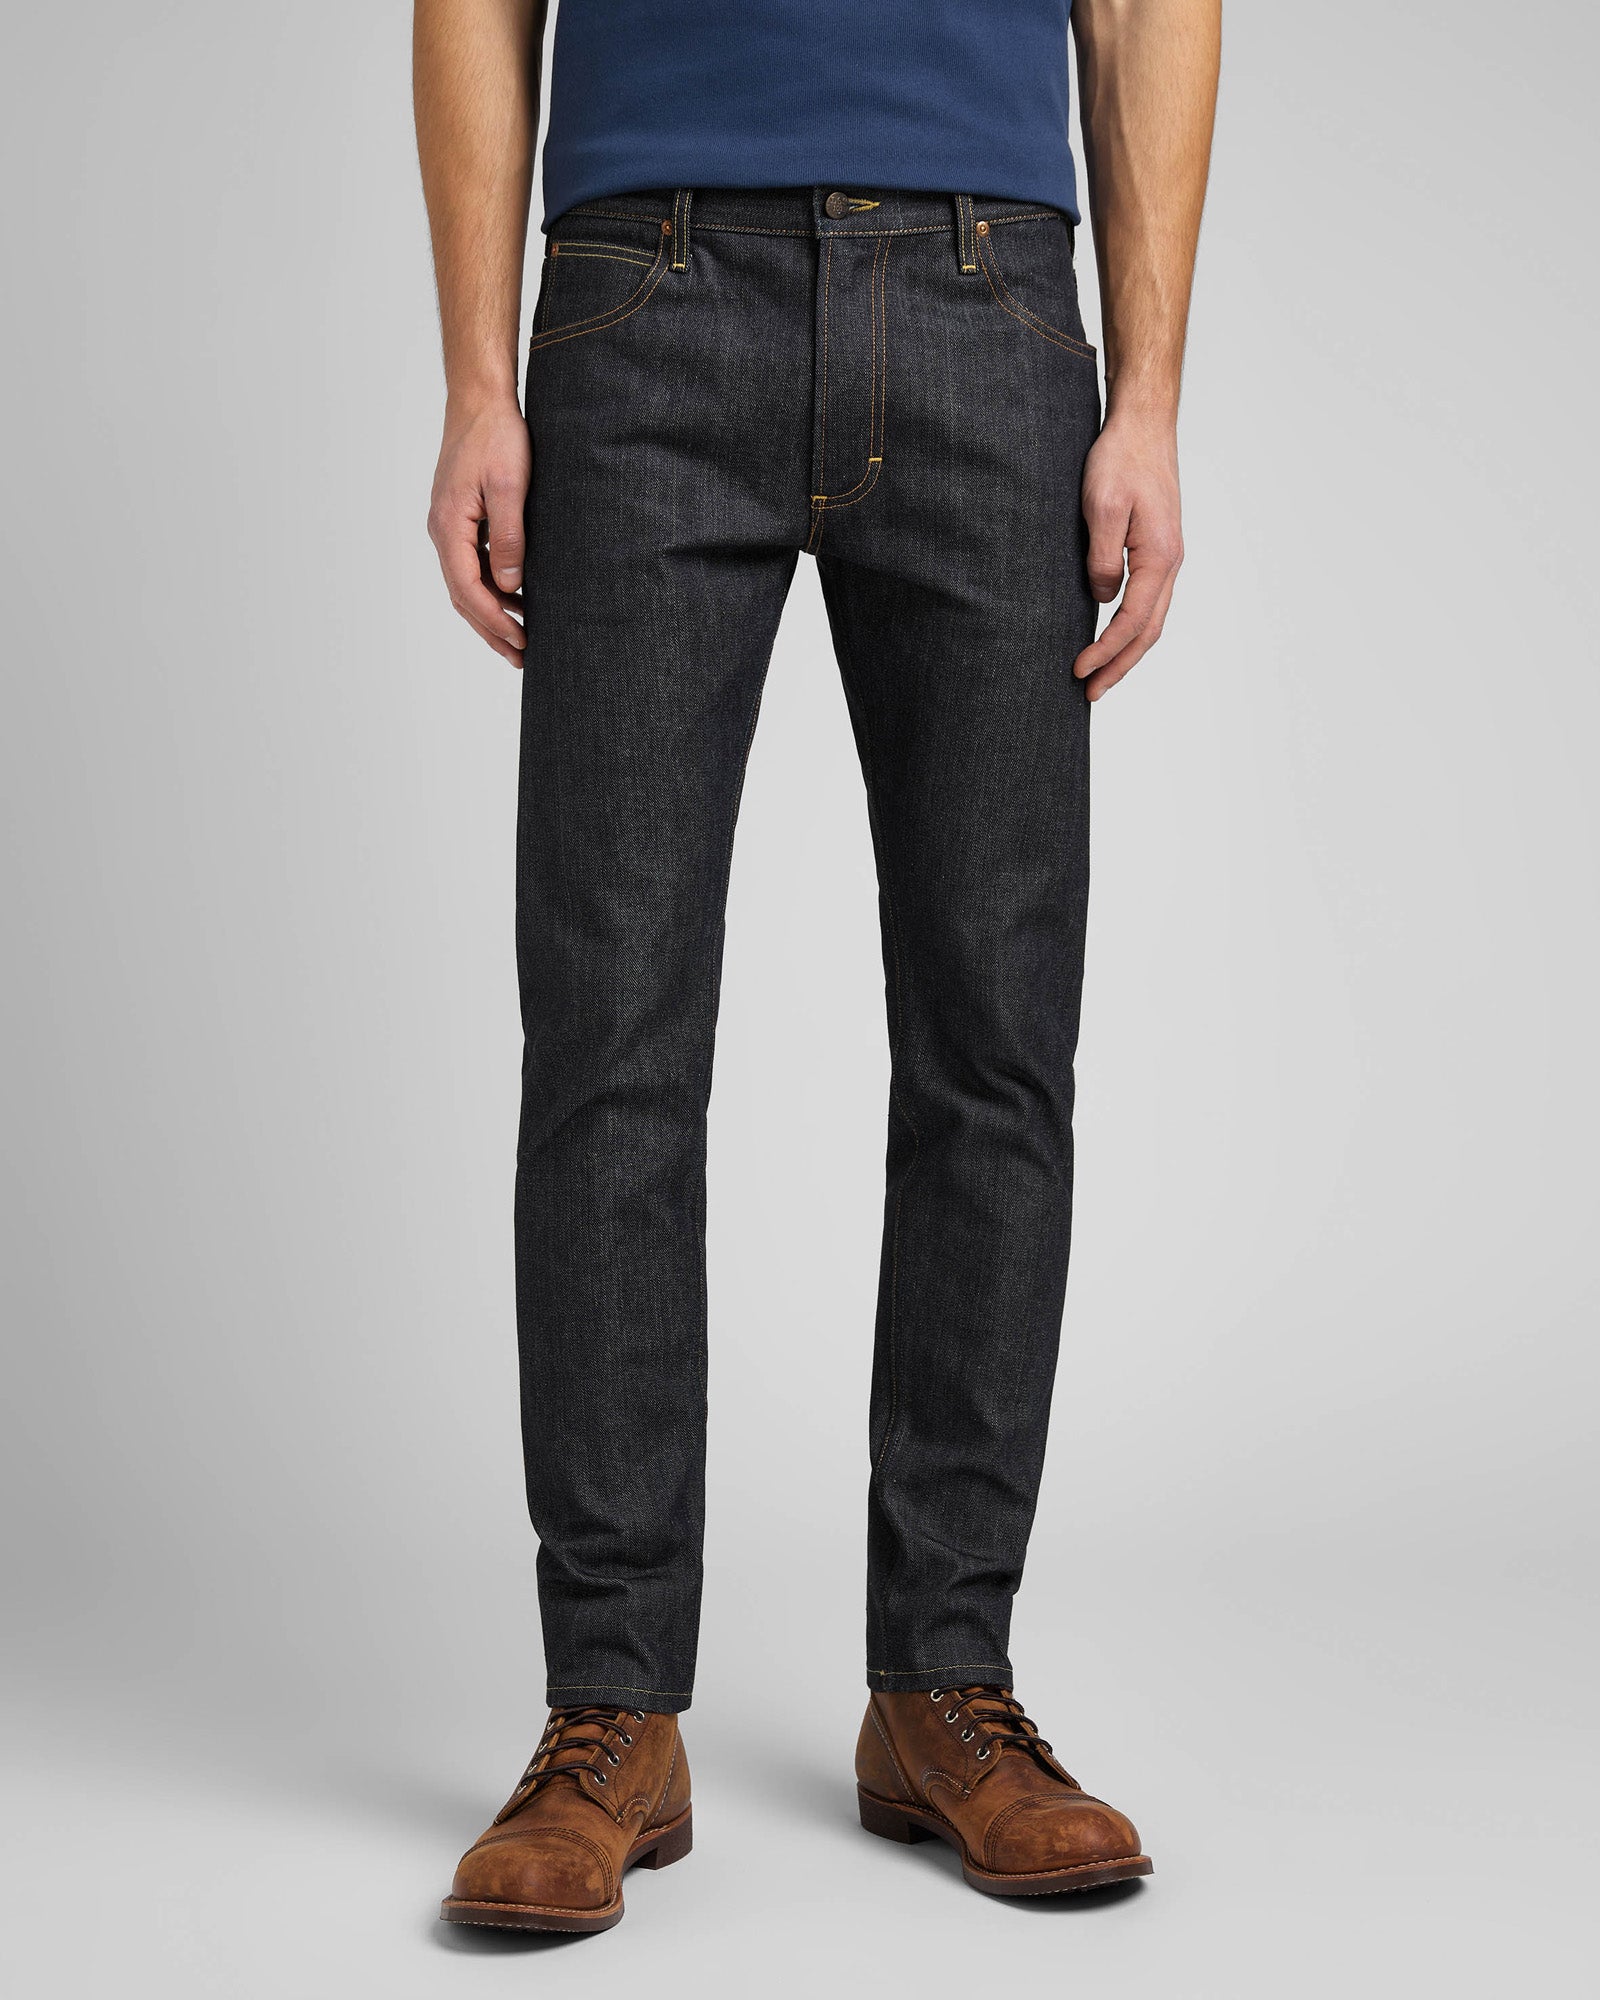 Lee 101 Rider Slim Fit Recycled Cotton 15oz Selvedge Mens Jeans - Dry ...